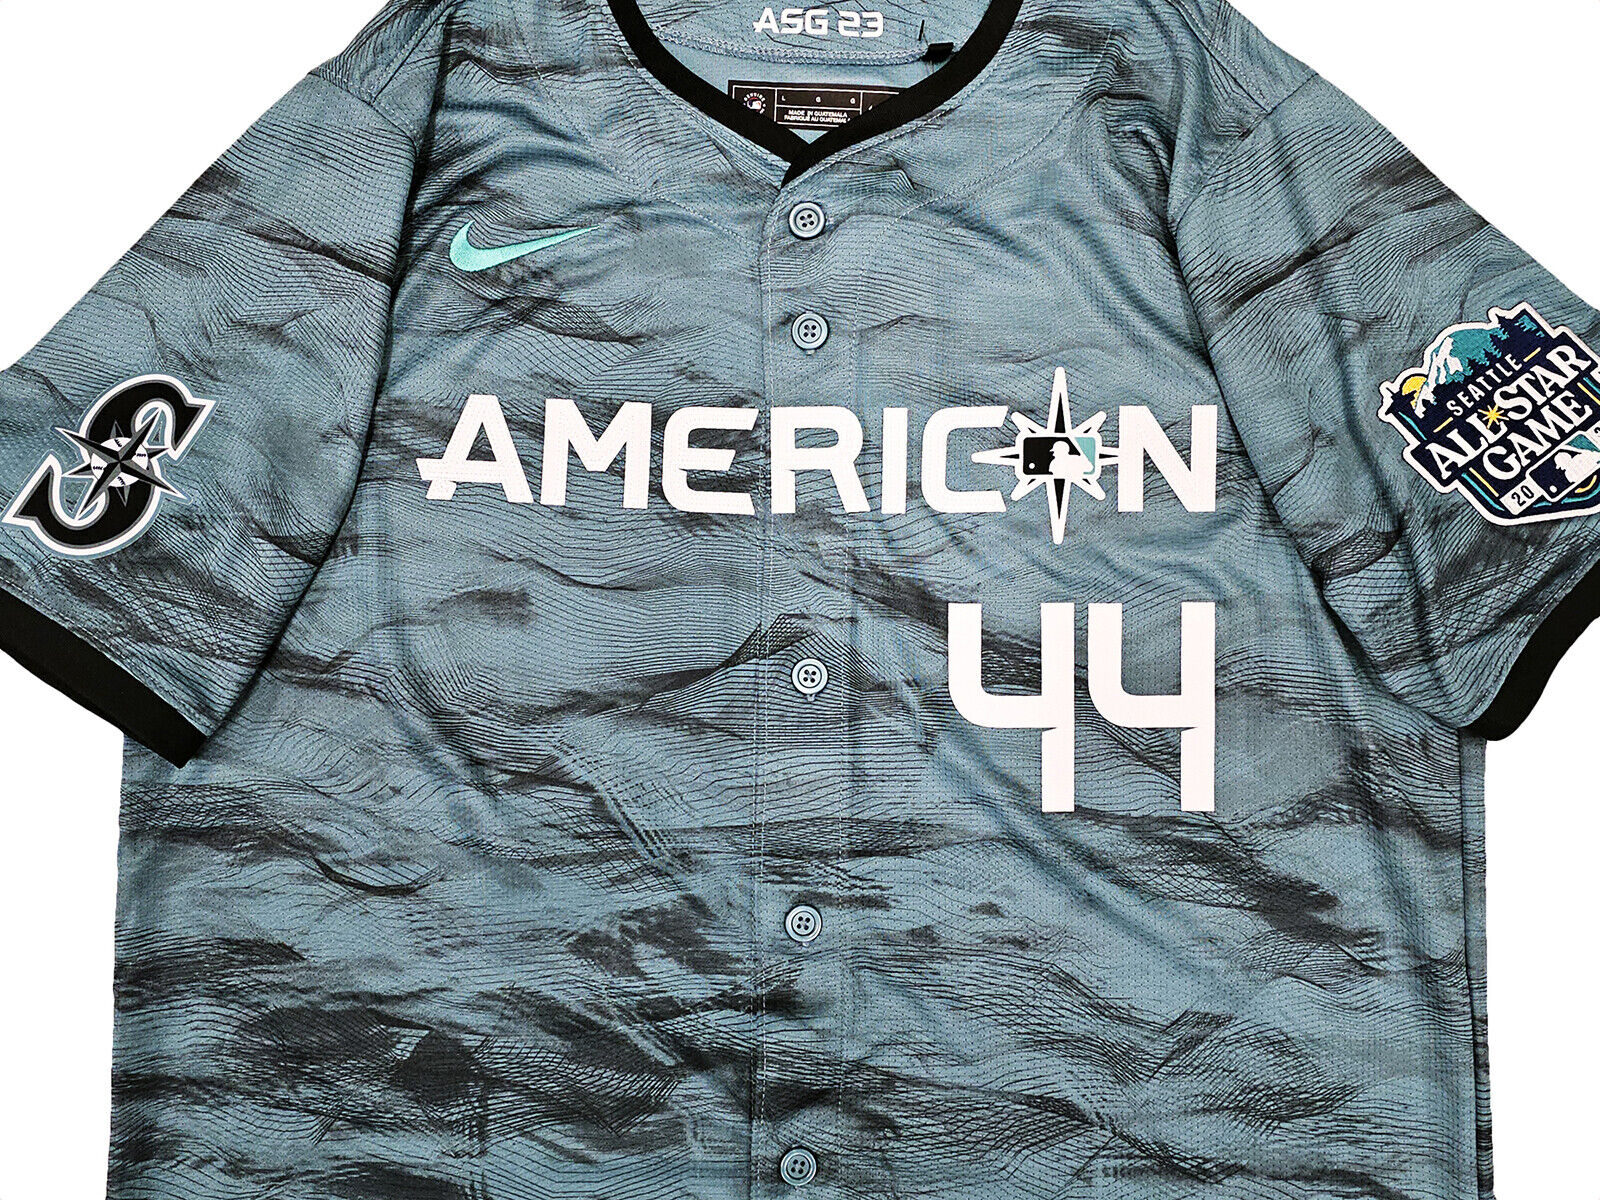 MARINERS JULIO RODRIGUEZ AUTOGRAPHED NIKE 2023 ALL STAR JERSEY L MLB H –  CollectibleXchange